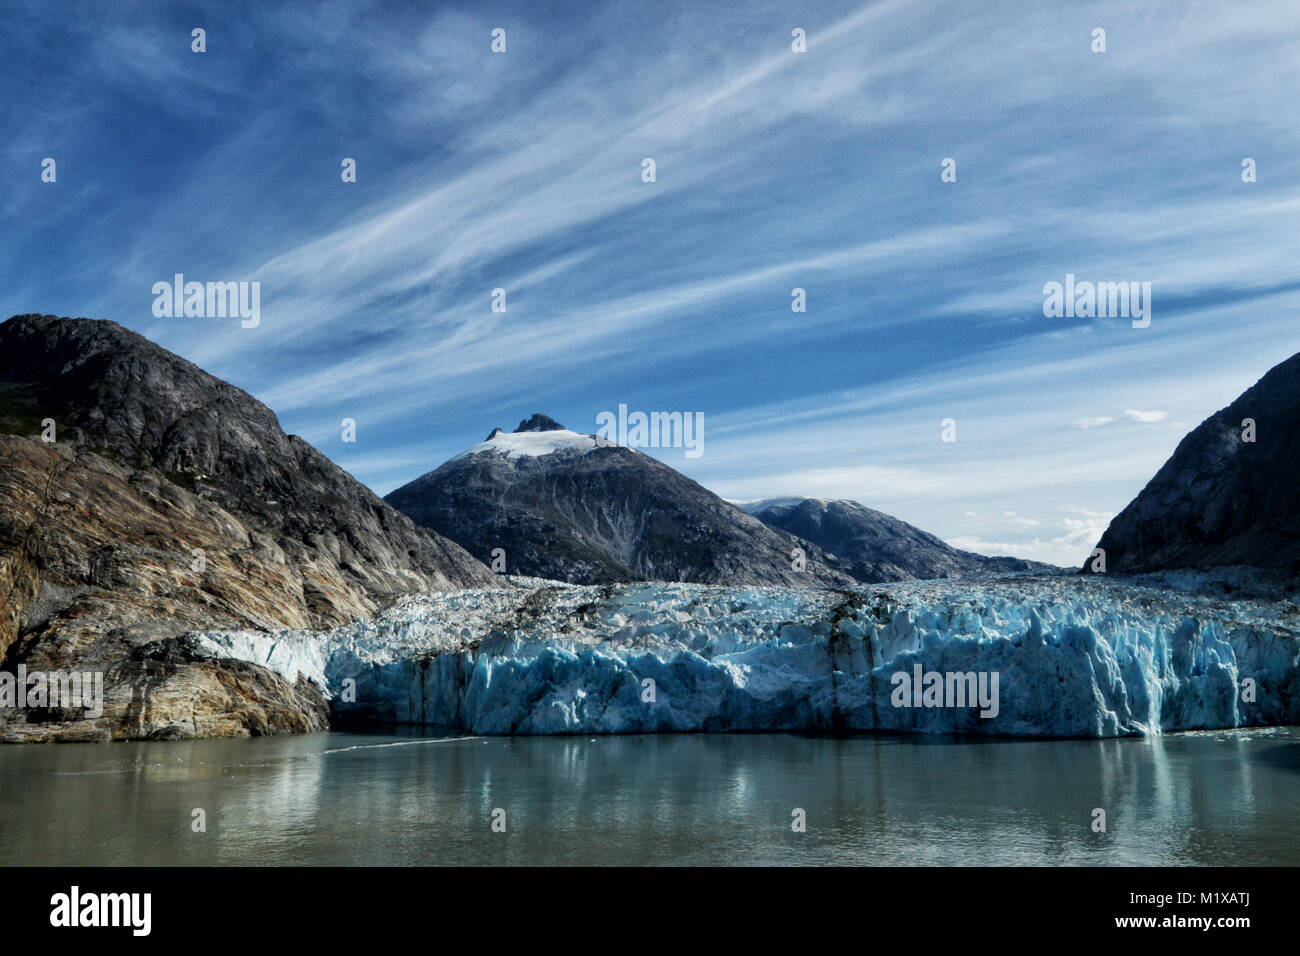 Endicott arm glacier surrounded by mountains. Stock Photo